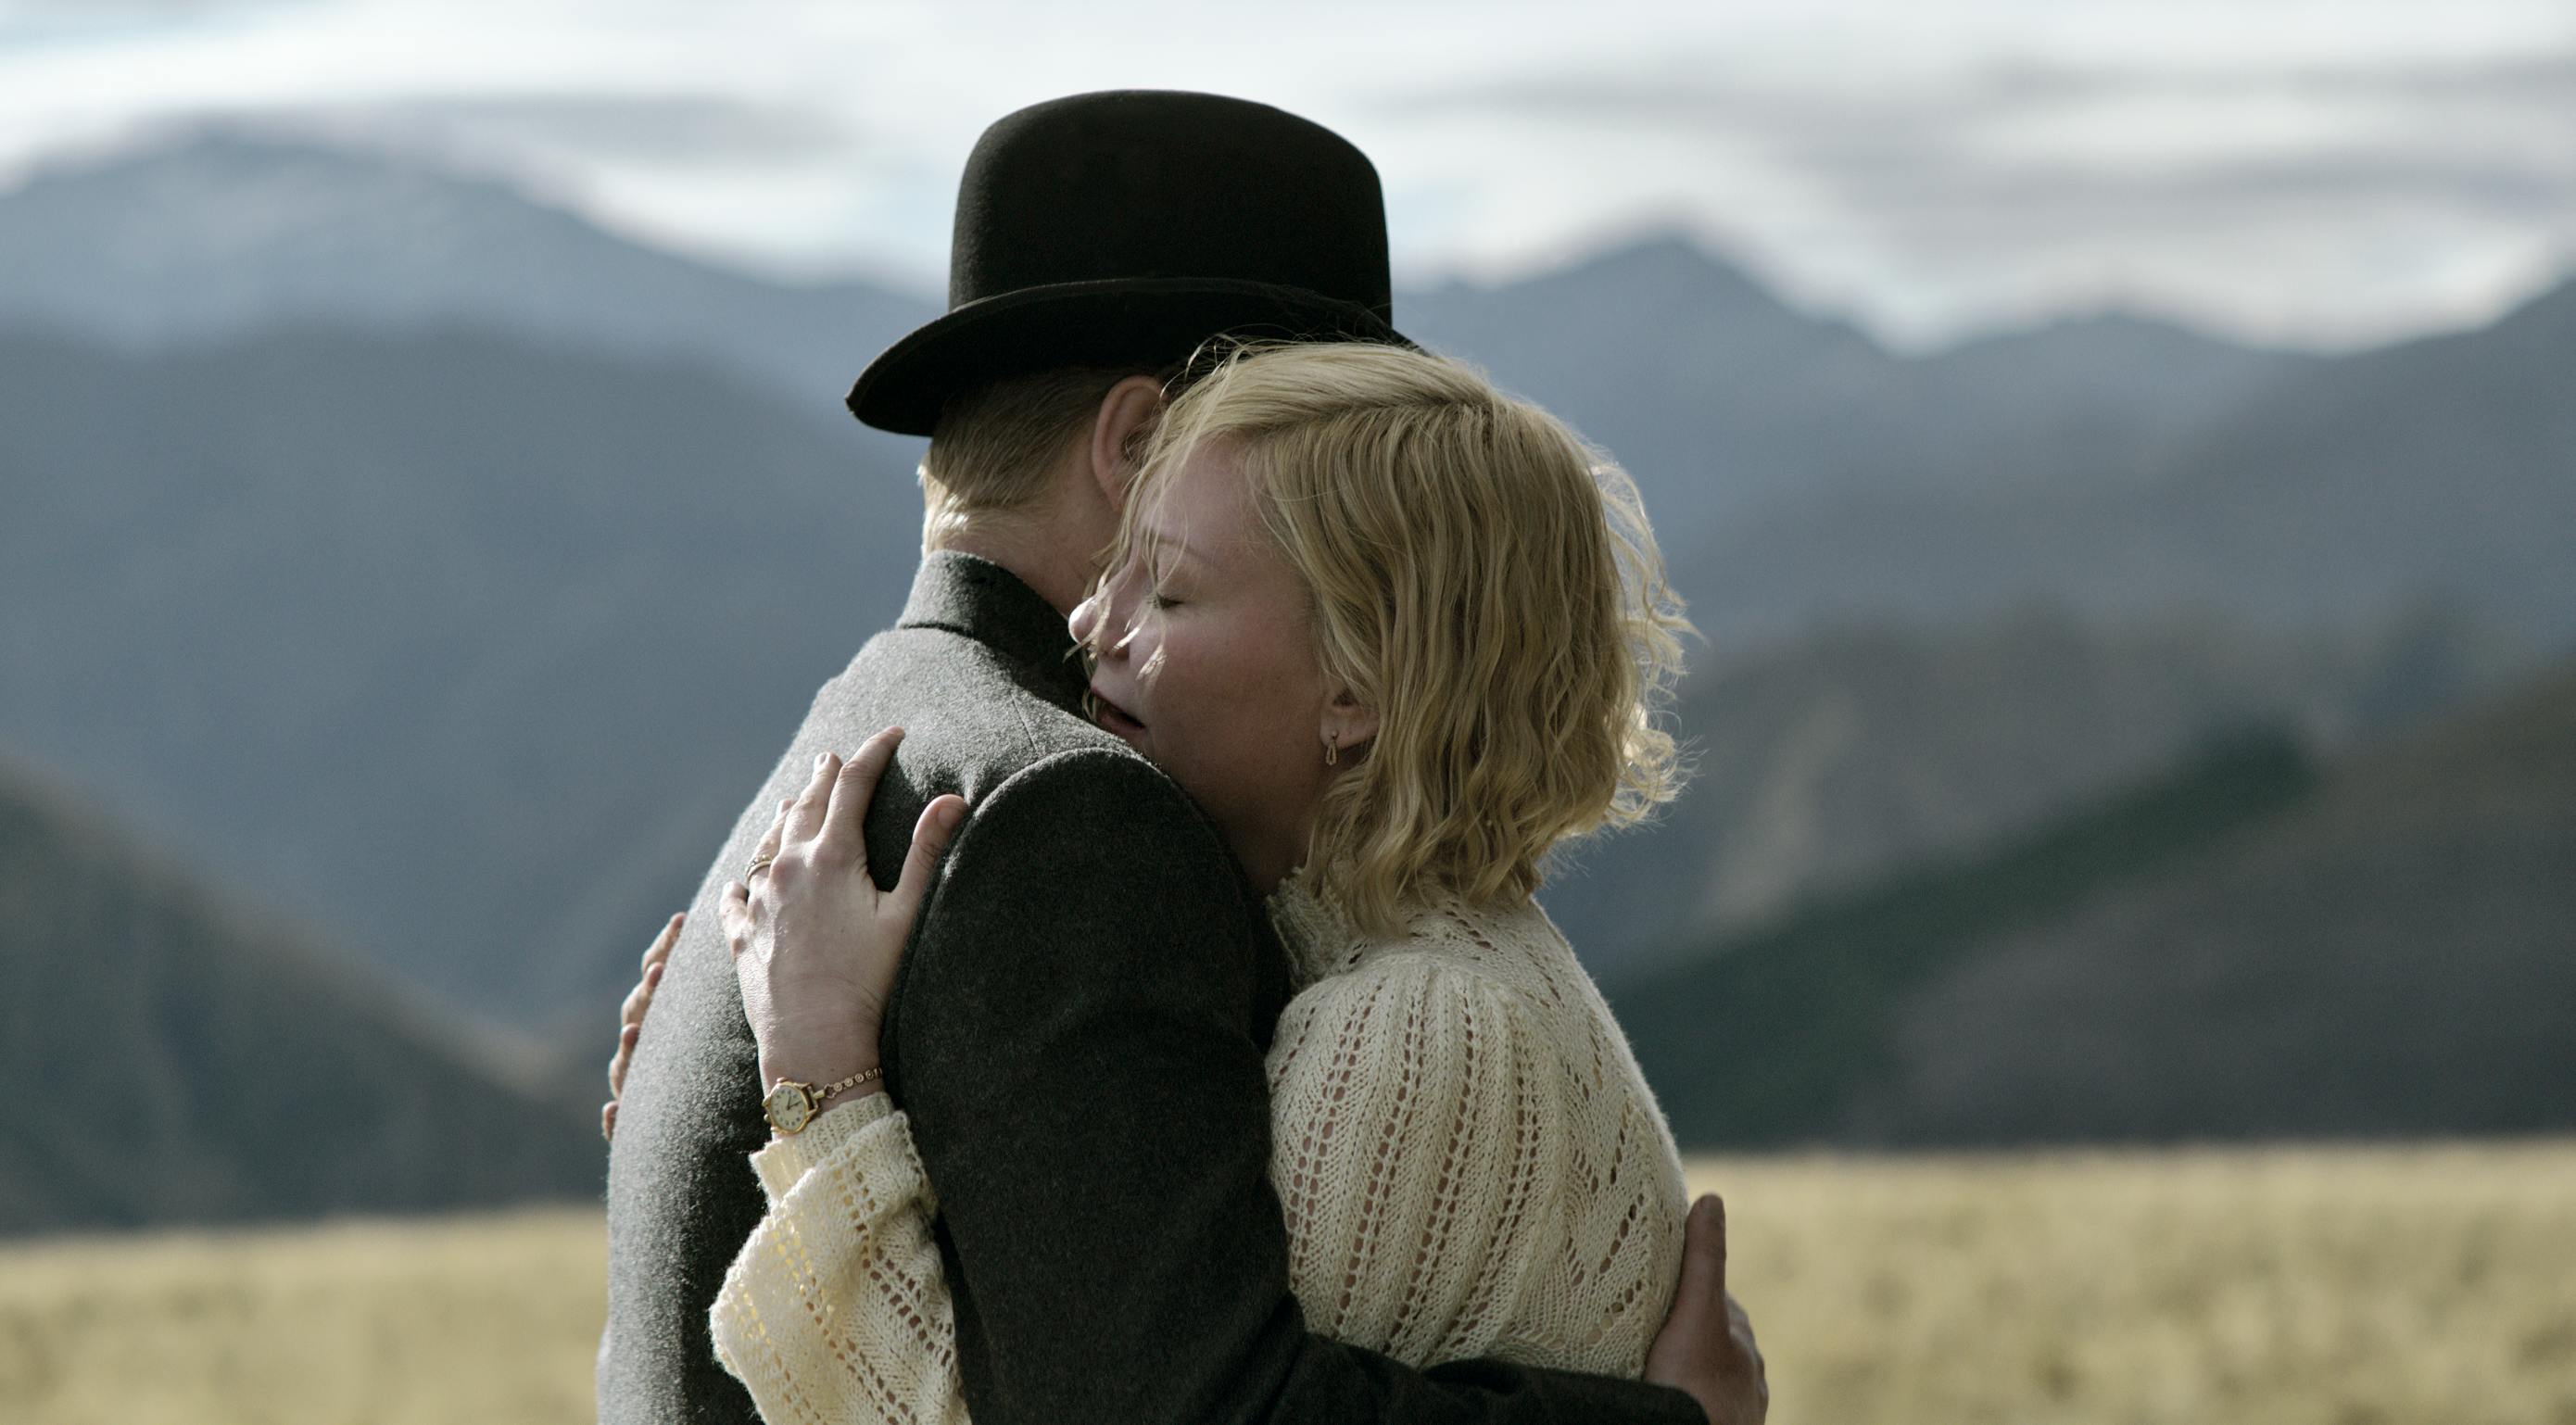 Jesse Plemons and Kirsten Dunst hug in the middle of an open field. He wears a dark suit and hat, she wears a sheer white blouse. The mountains behind them are blue-green, and blurry.